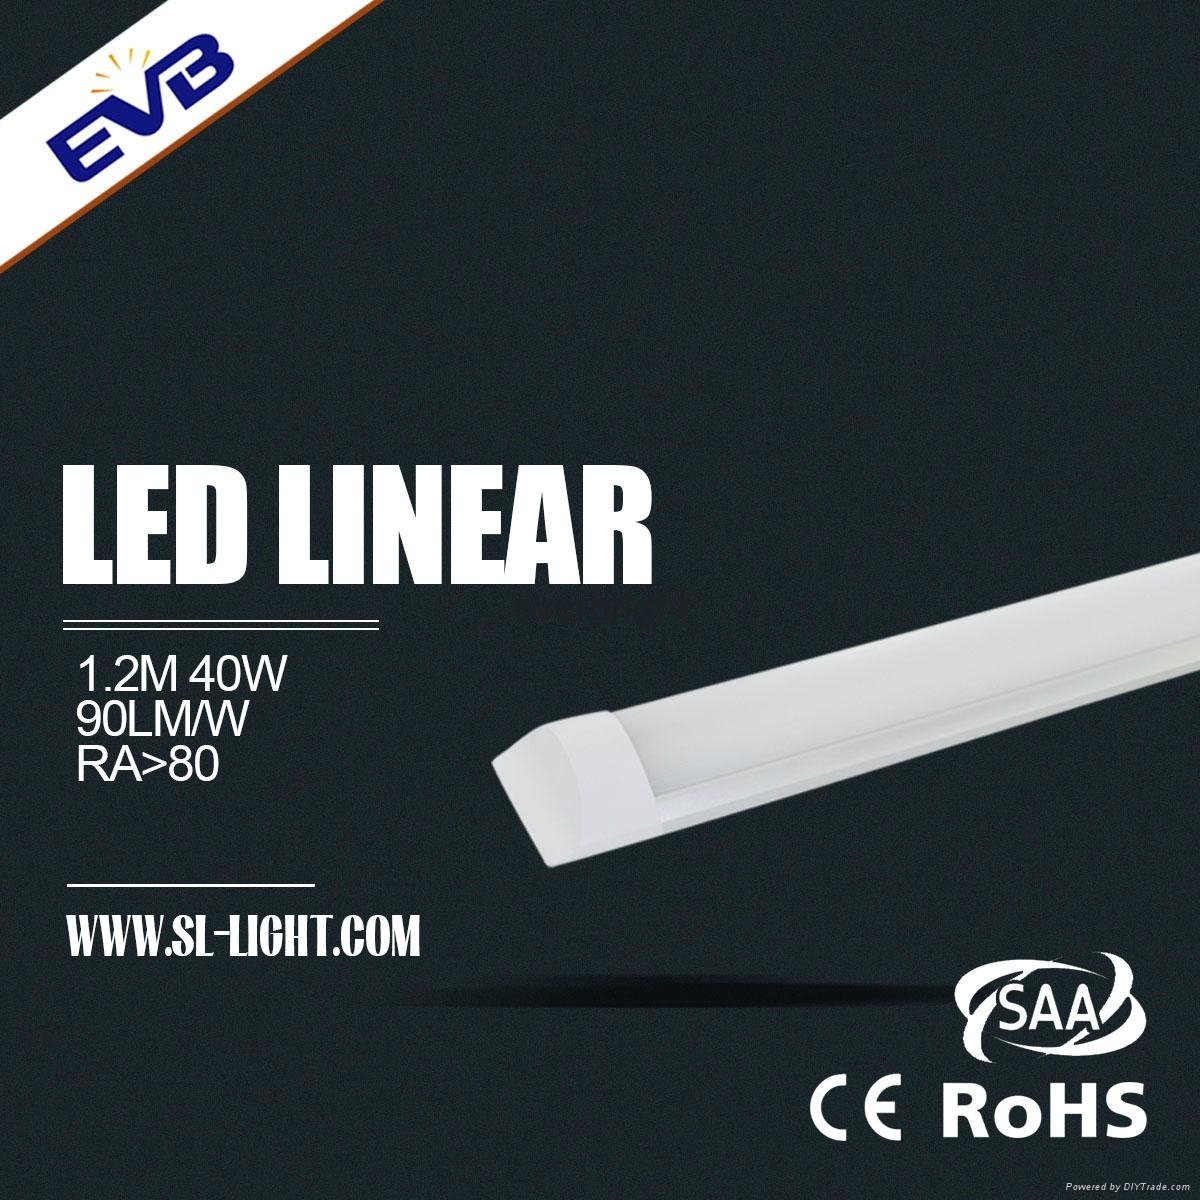 4ft 40W 3600lm linear led light with CE, RoHS certs